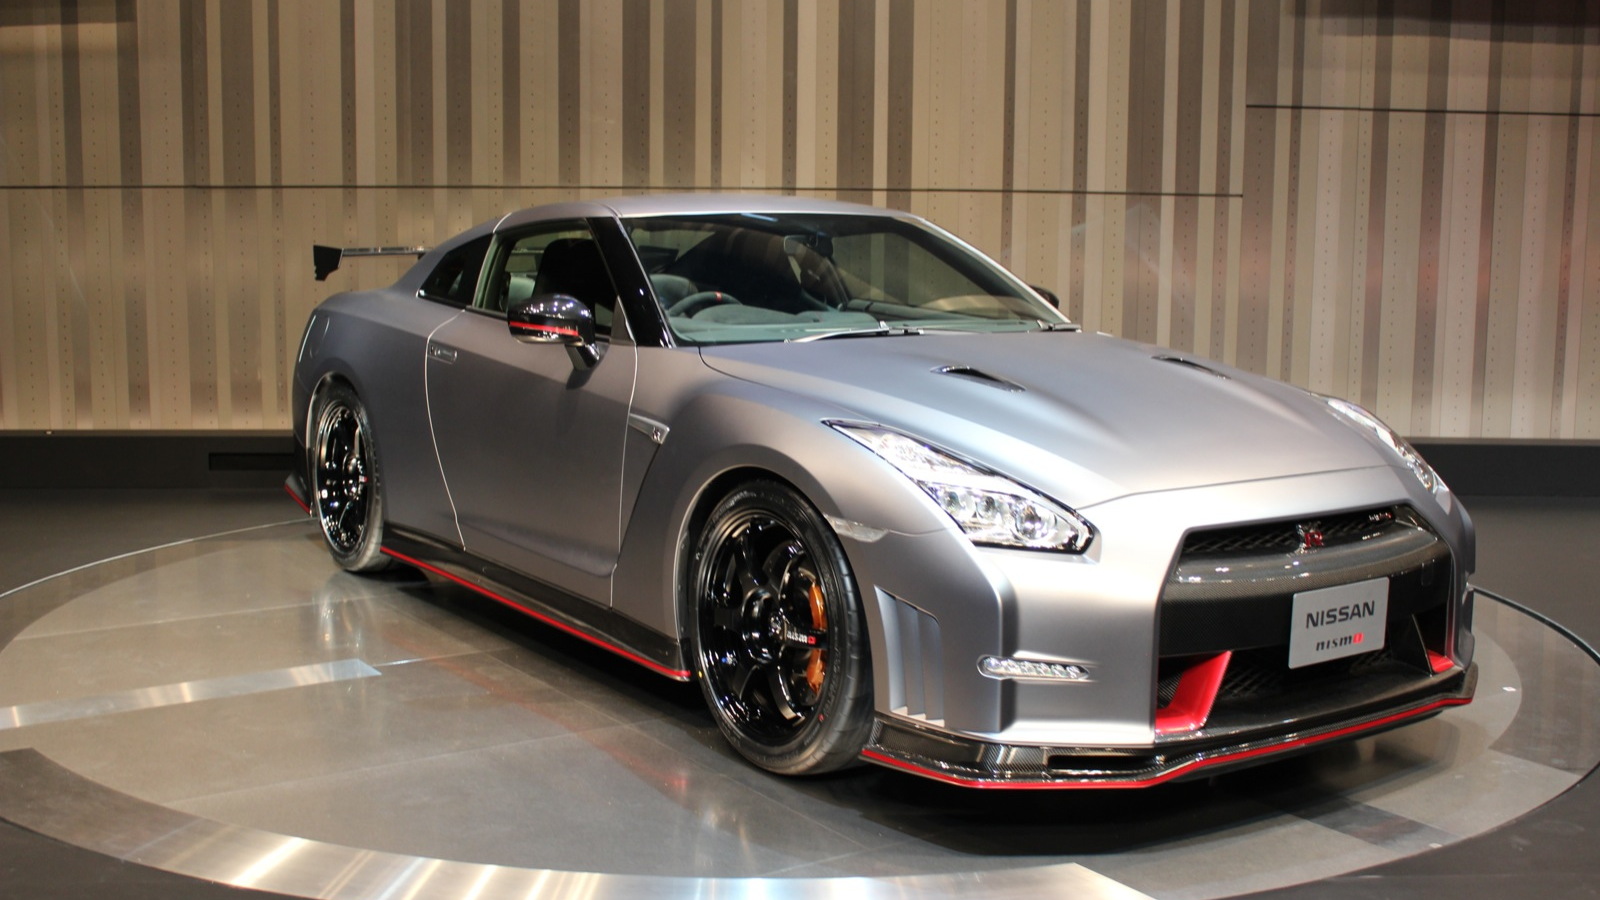 2015 Nissan GT-R NISMO  -  2013 Tokyo Motor Show preview event, Nissan Global Headquarters